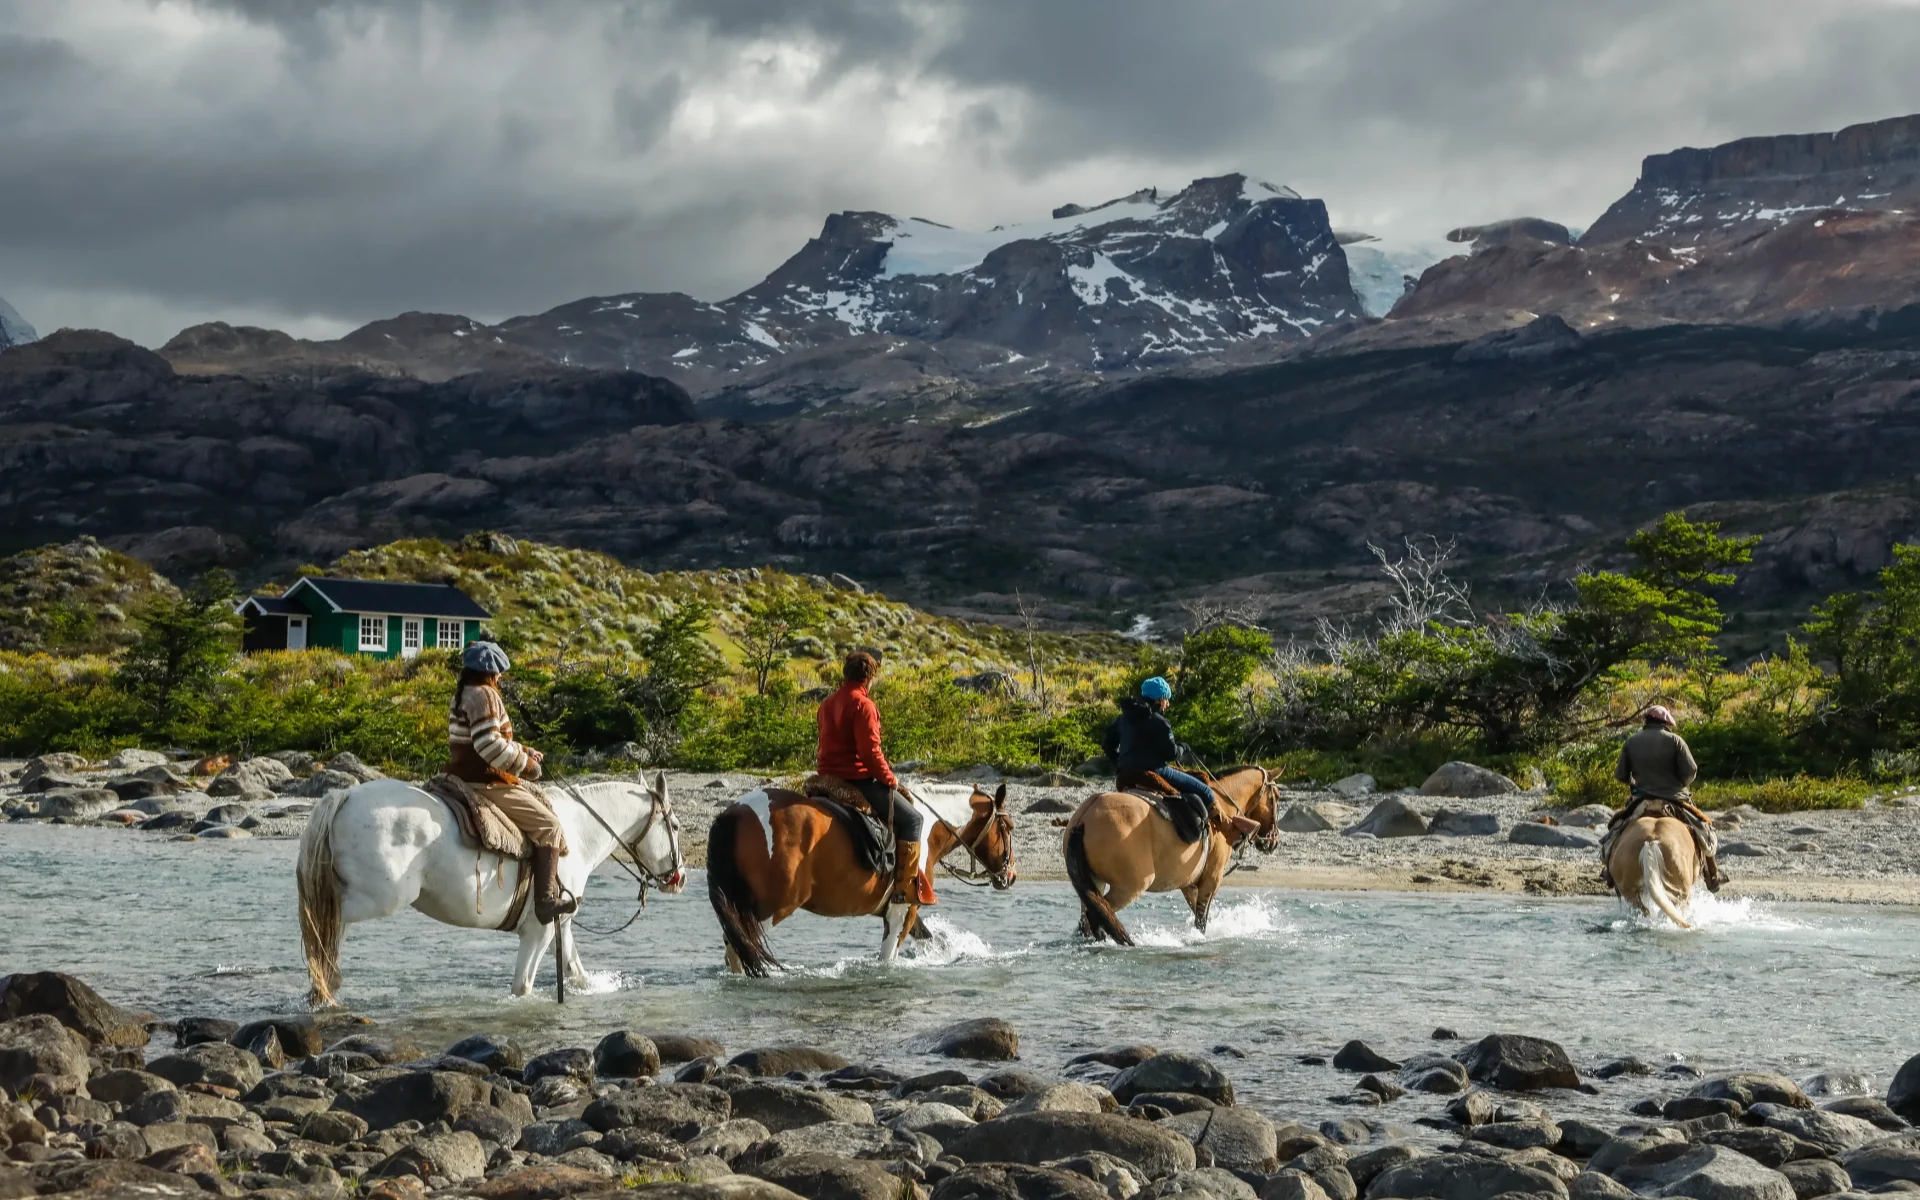 Three people ride on horses across a running stream and a dramatic mountain scenery rises behind them.